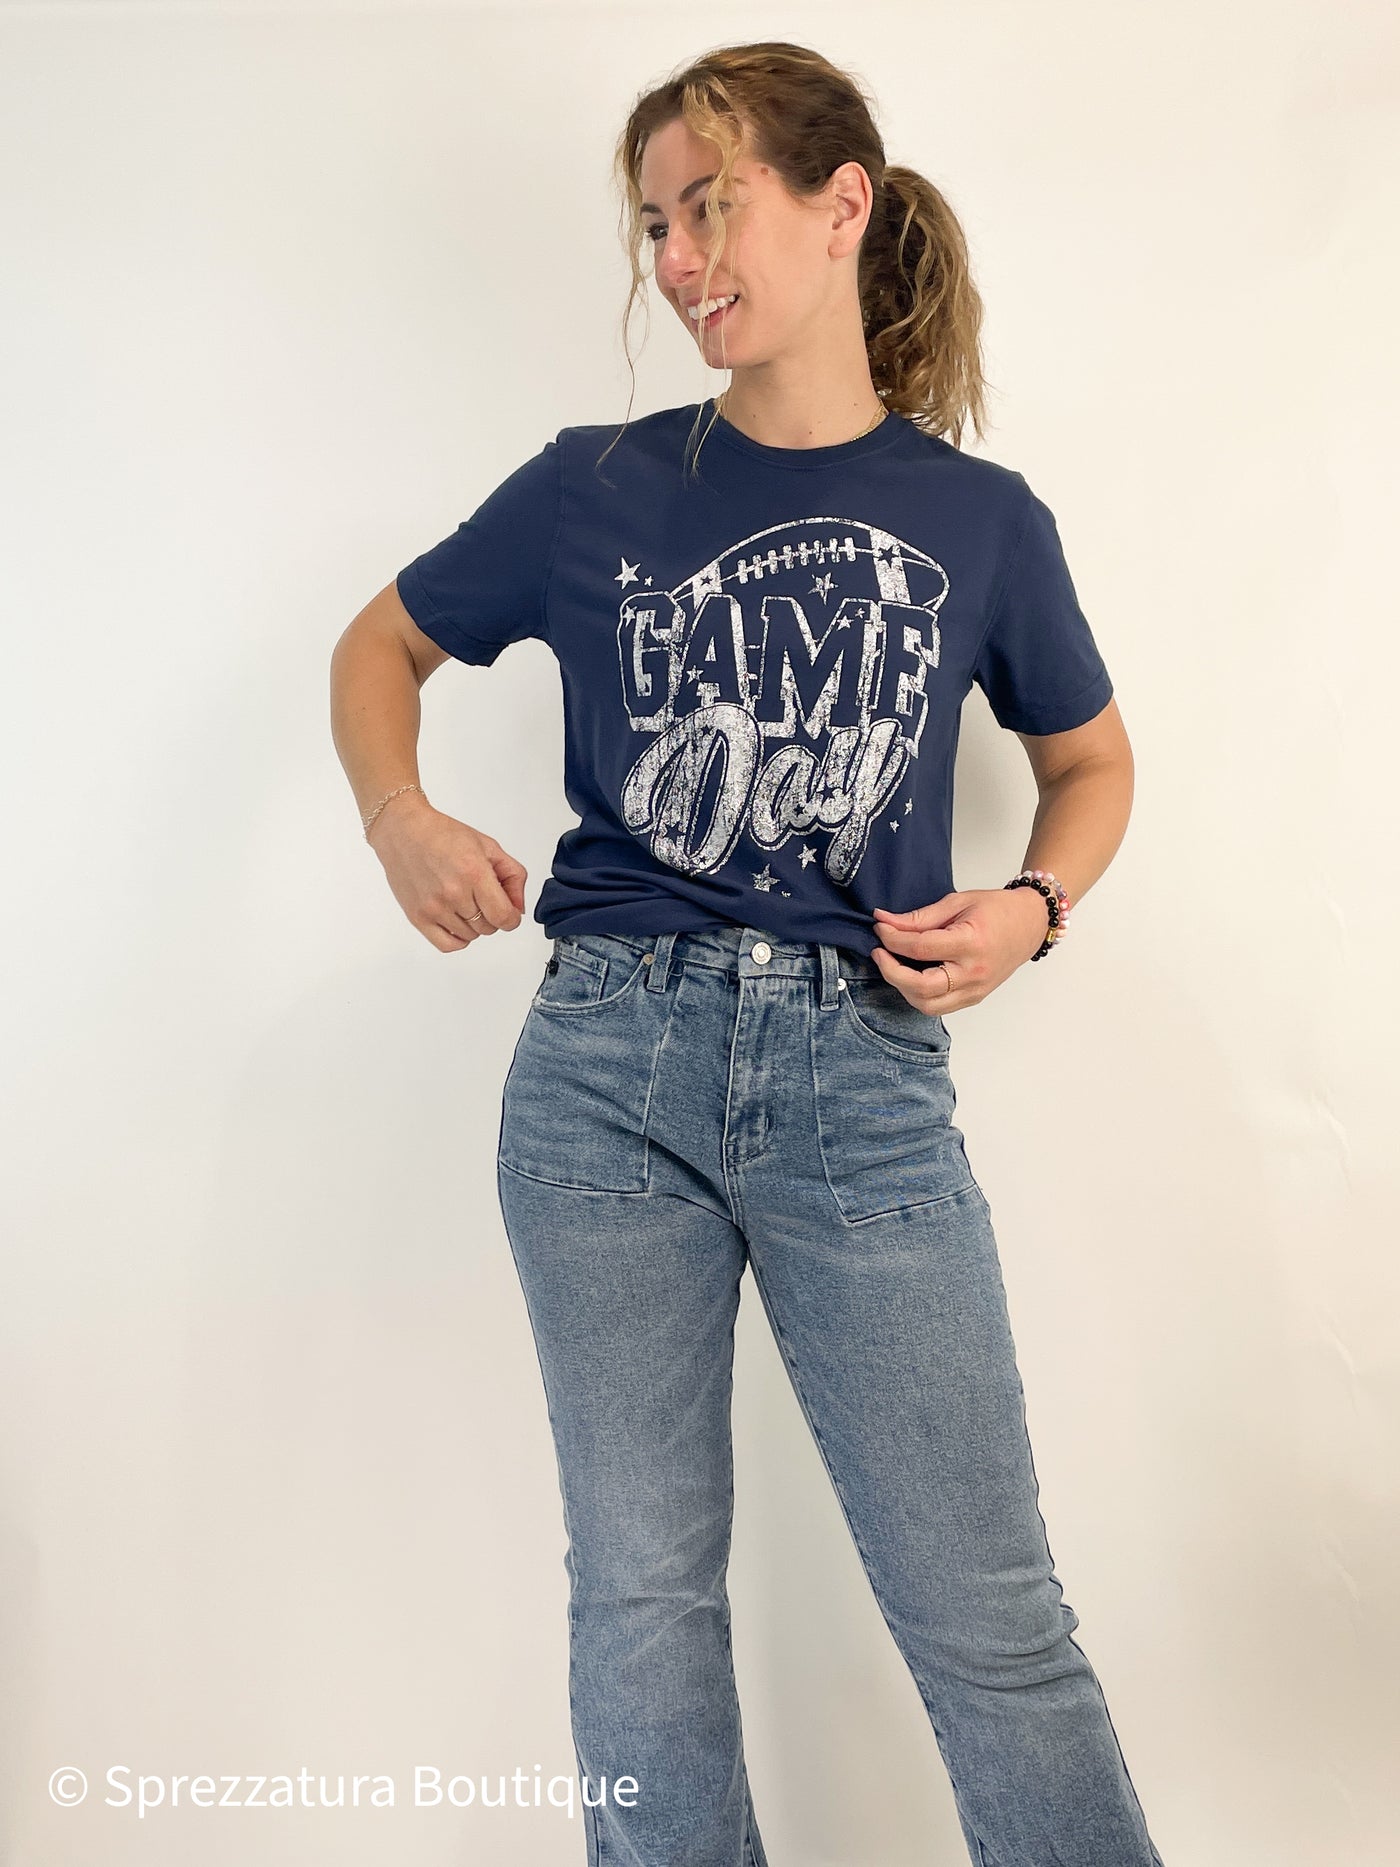 Navy blue football game day cute tee vintage retro look womens teacher mom casual fall graphic t-shirt Modern smart causal female chic effortless outfit womens ladies gift elegant effortless clothing everyday stylish clothes apparel outfits chic winter summer style women’s boutique trendy teacher office cute outfit boutique clothes fashion quality work from home coastal beachy neutral wardrobe essential basics lounge athleisure gift for her 